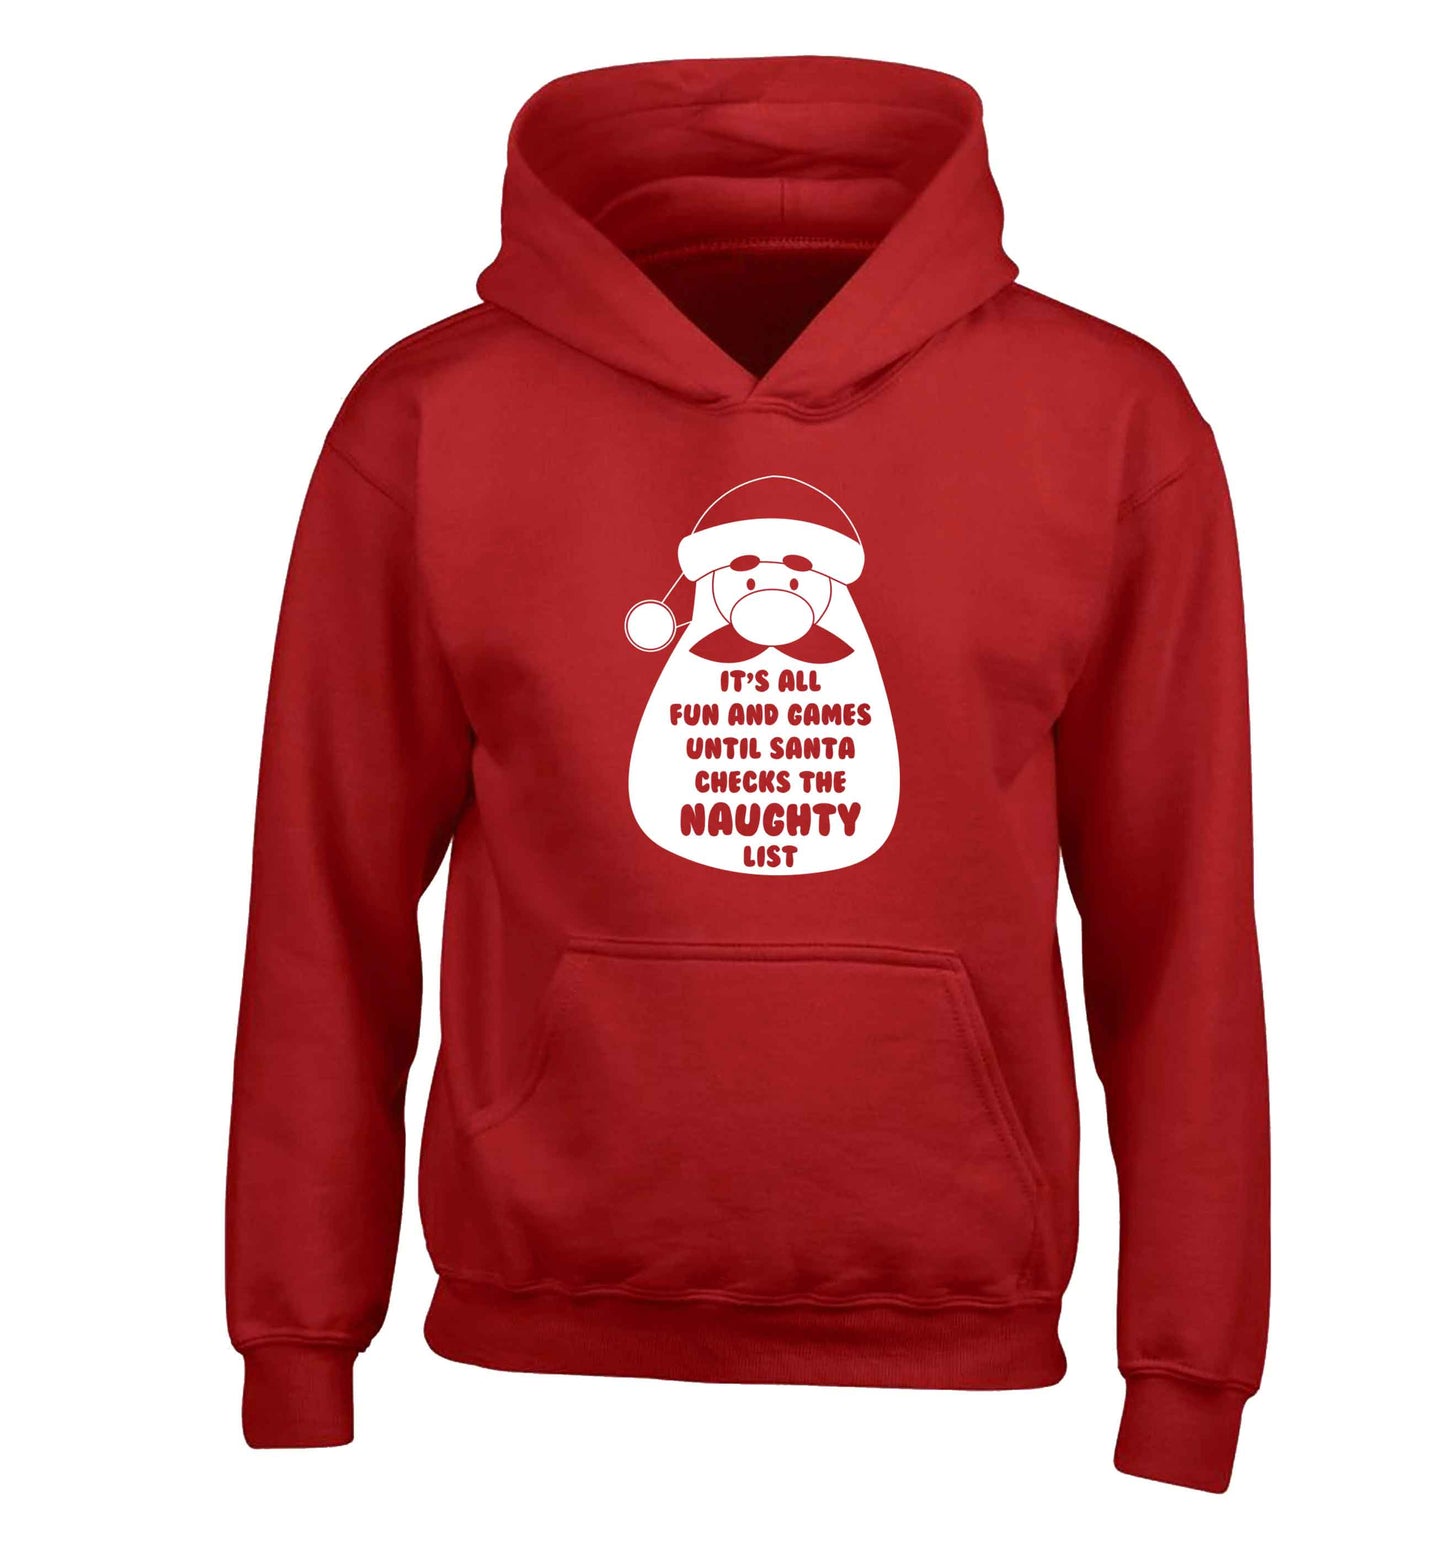 It's all fun and games until Santa checks the naughty list children's red hoodie 12-13 Years